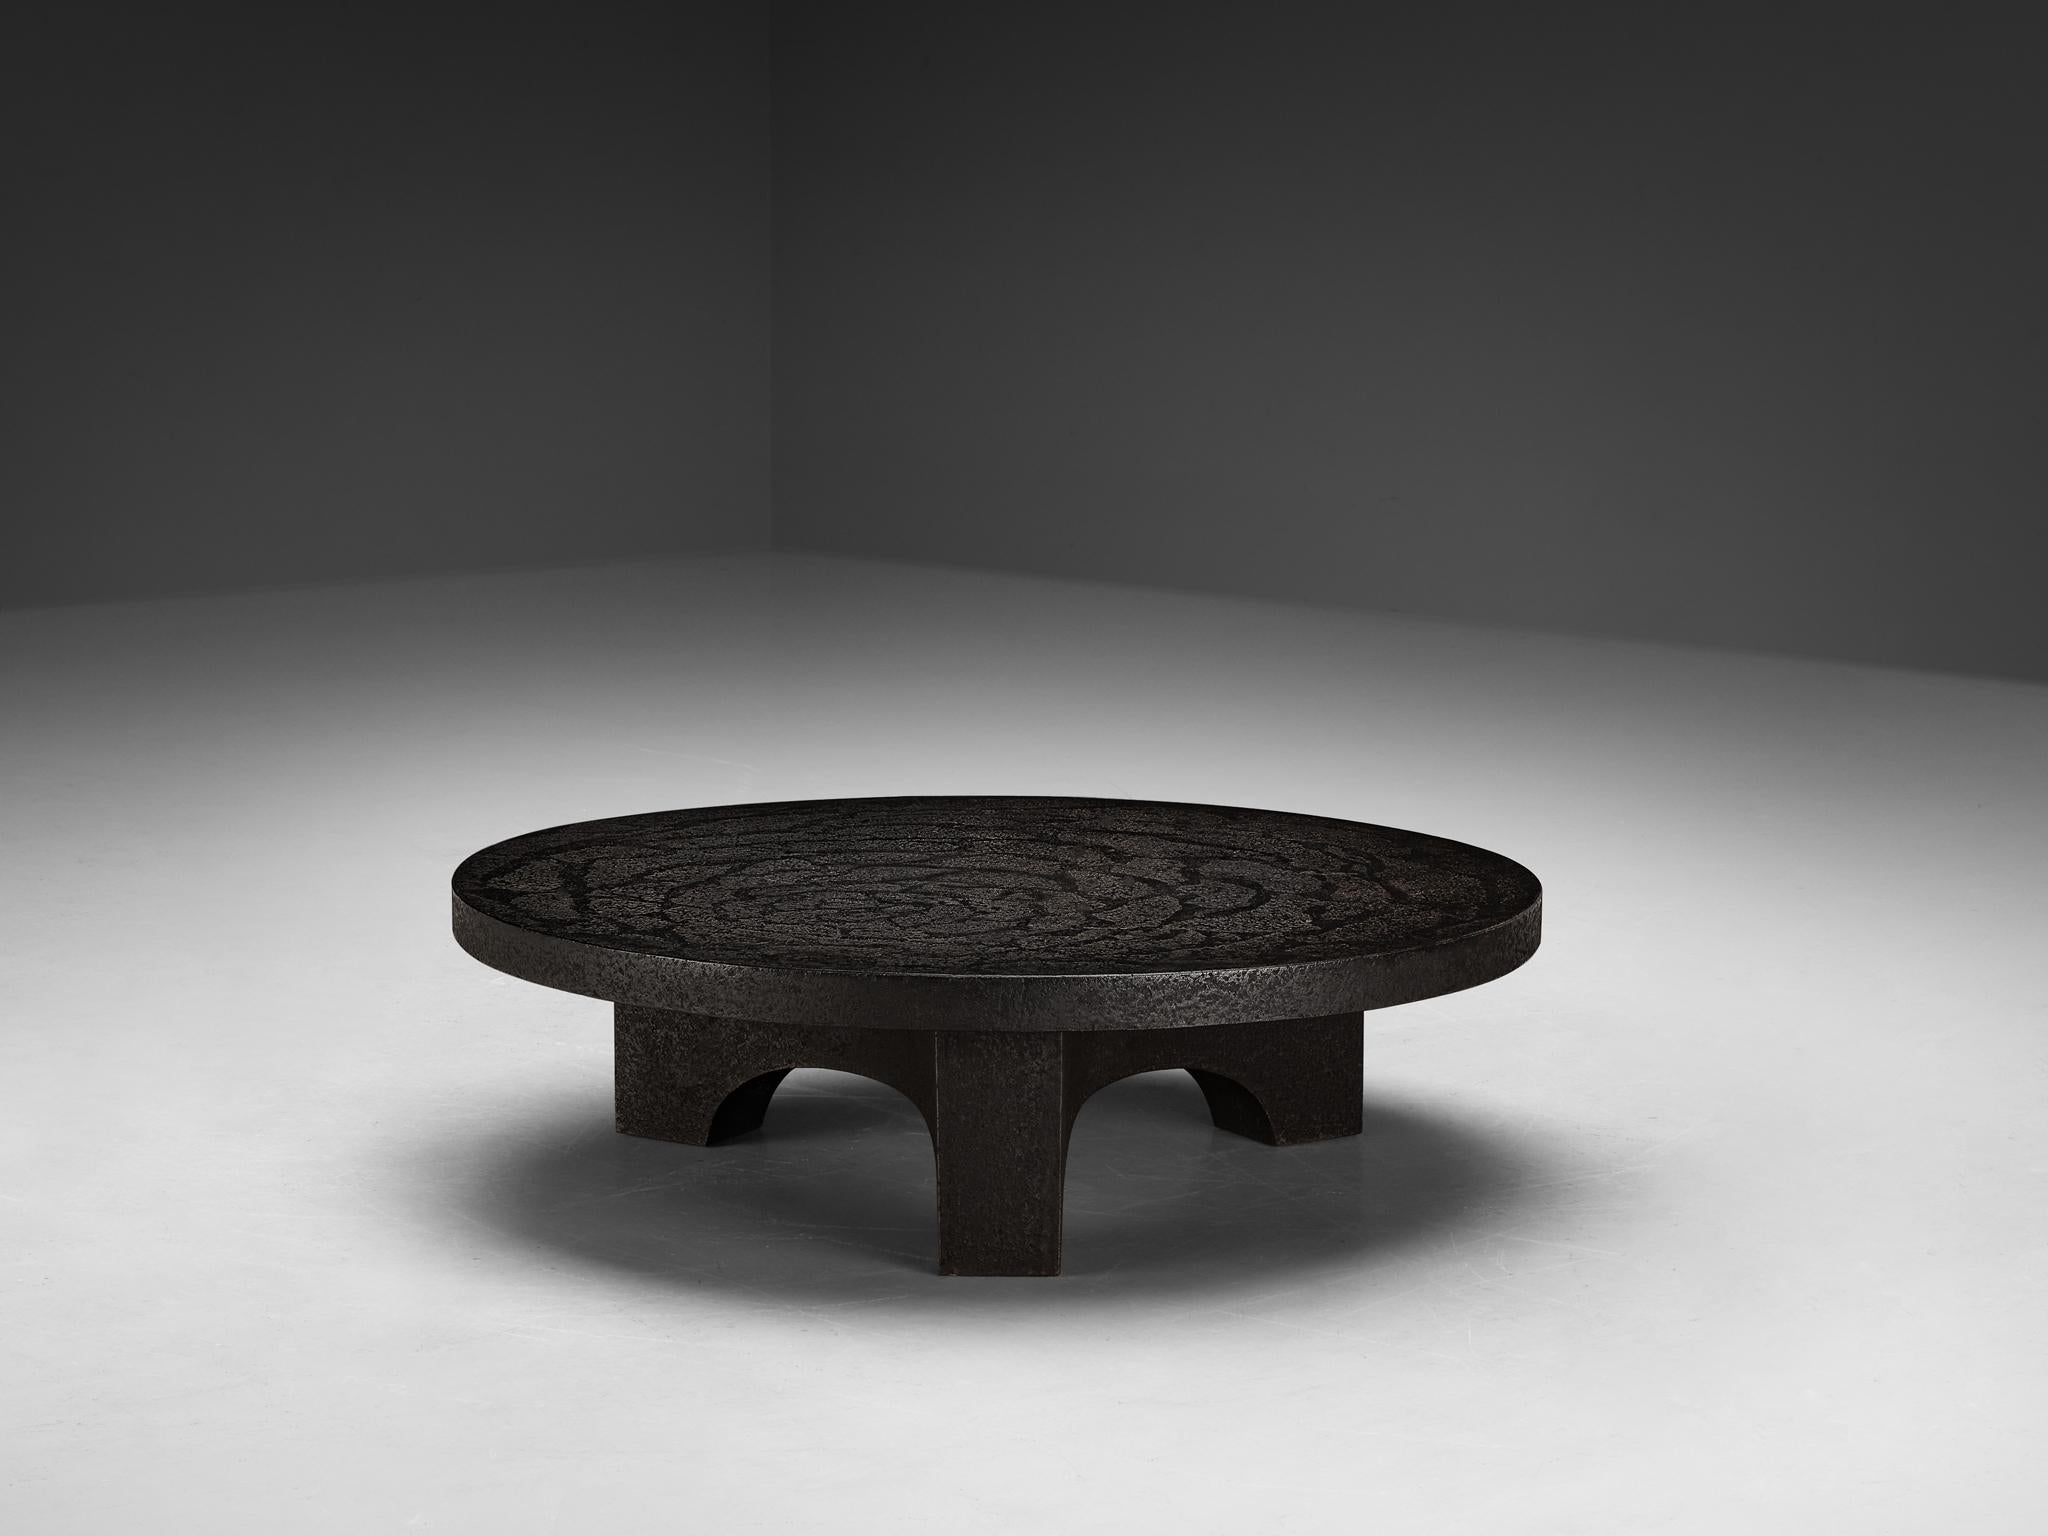 Cocktail table, resin, Northern-Europe, 1970s.

This deep black robust coffee or cocktail table is from the 1970s. The thick round shaped top is supported by a smaller column. The whole construction is executed in resin which resembles the